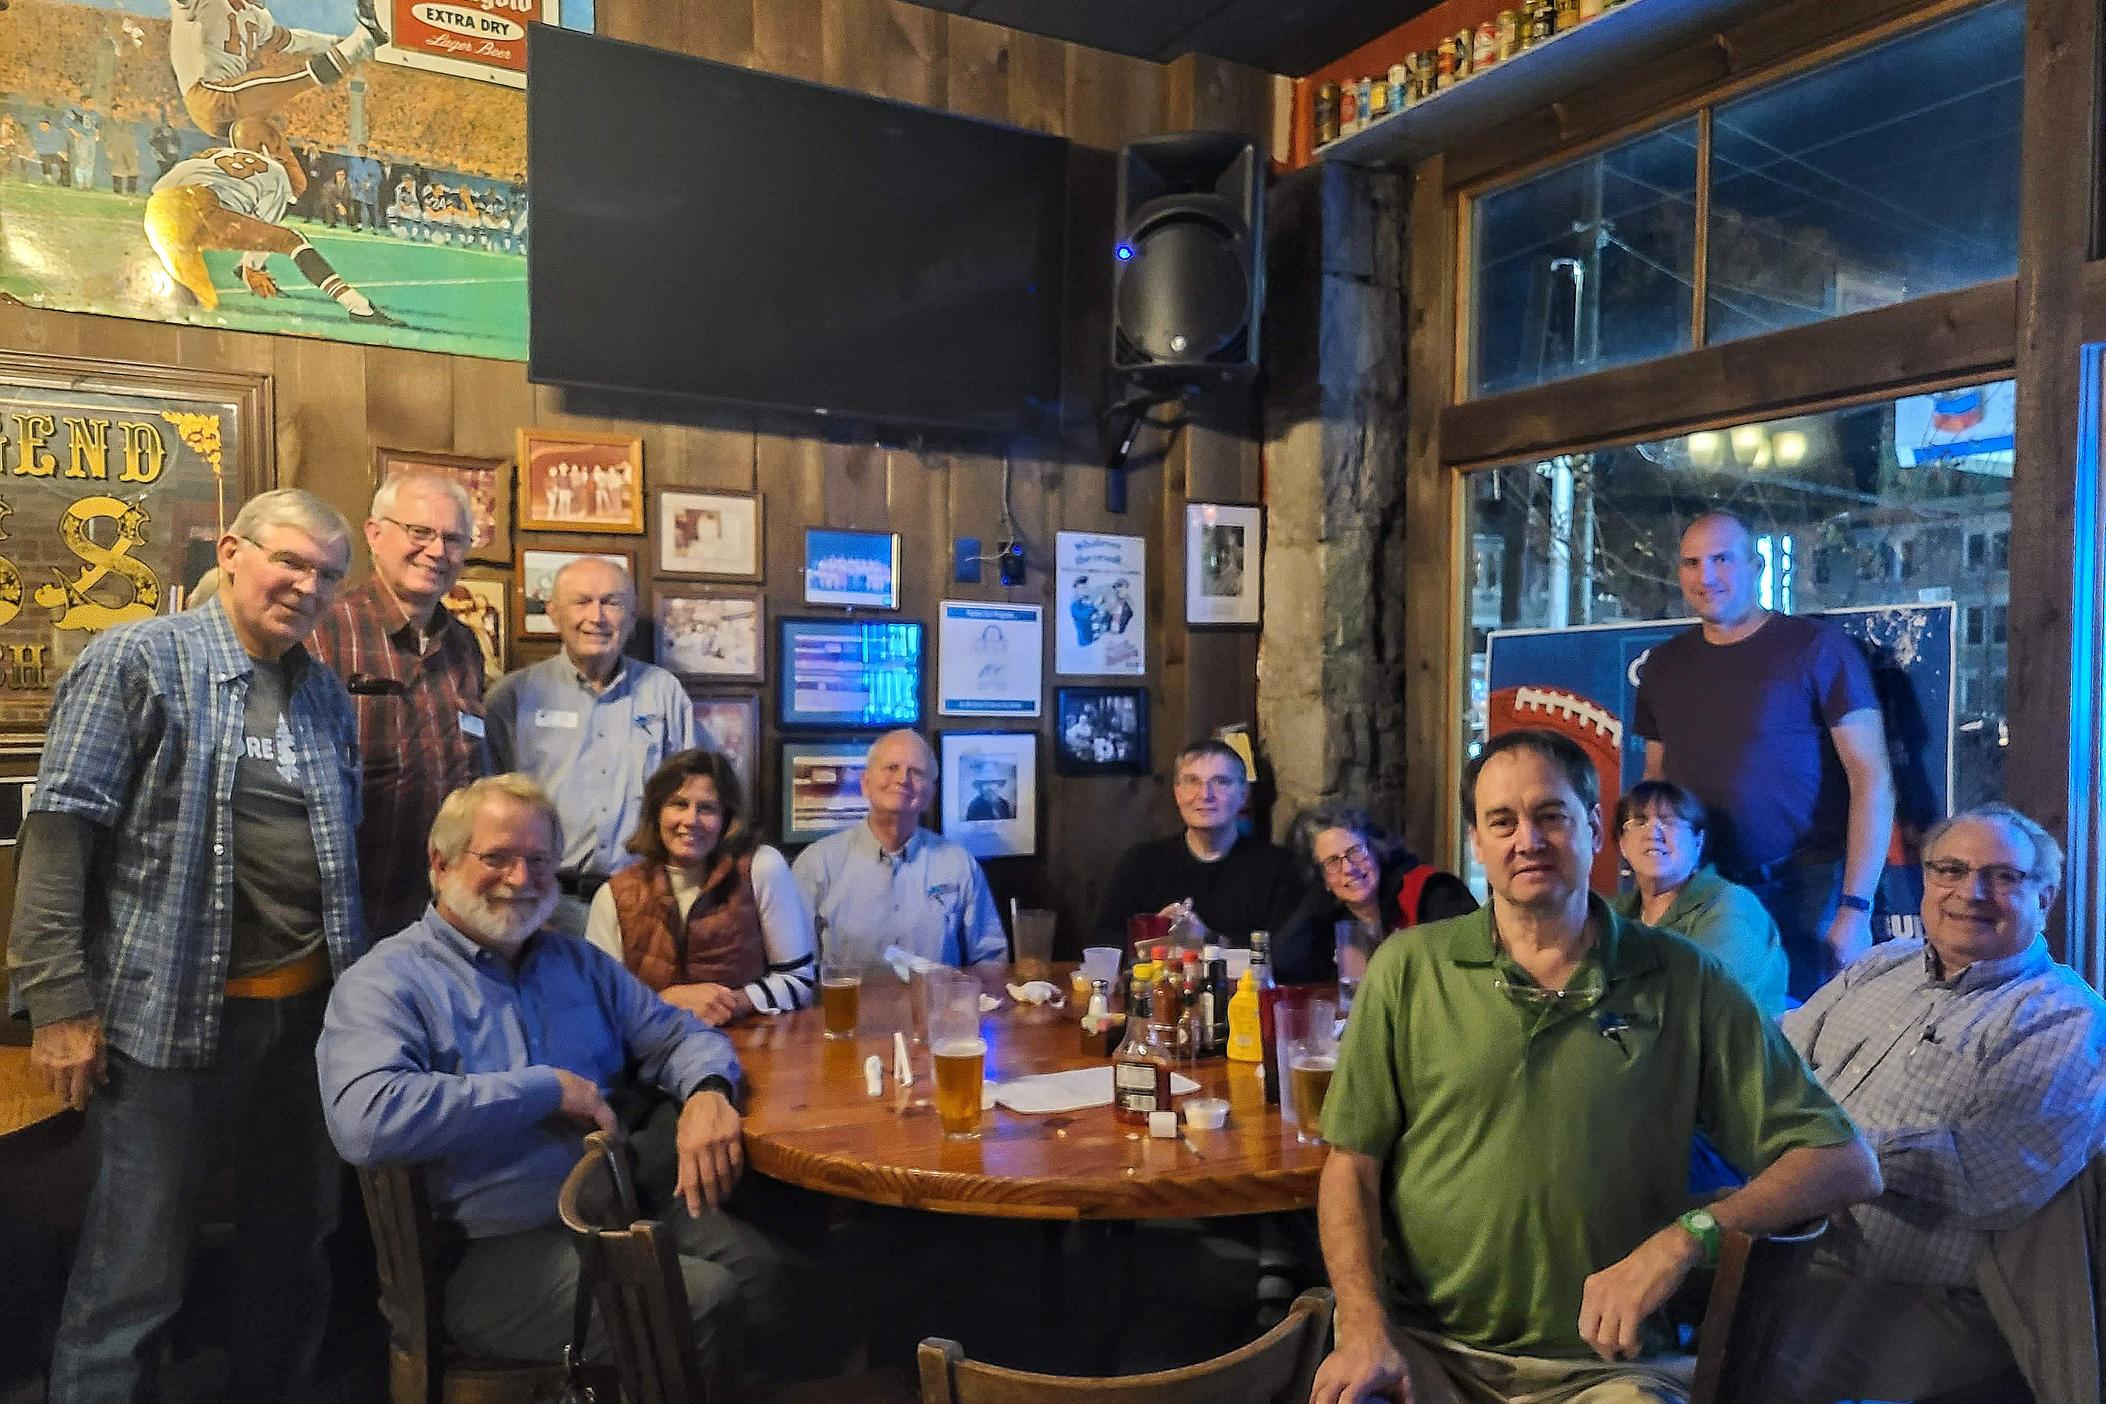 Members of the EV Club of the South met at Manuel's Tavern for their monthly meeting. Their goal is to inform policy makers and consumers about electric vehicles and clean energy.